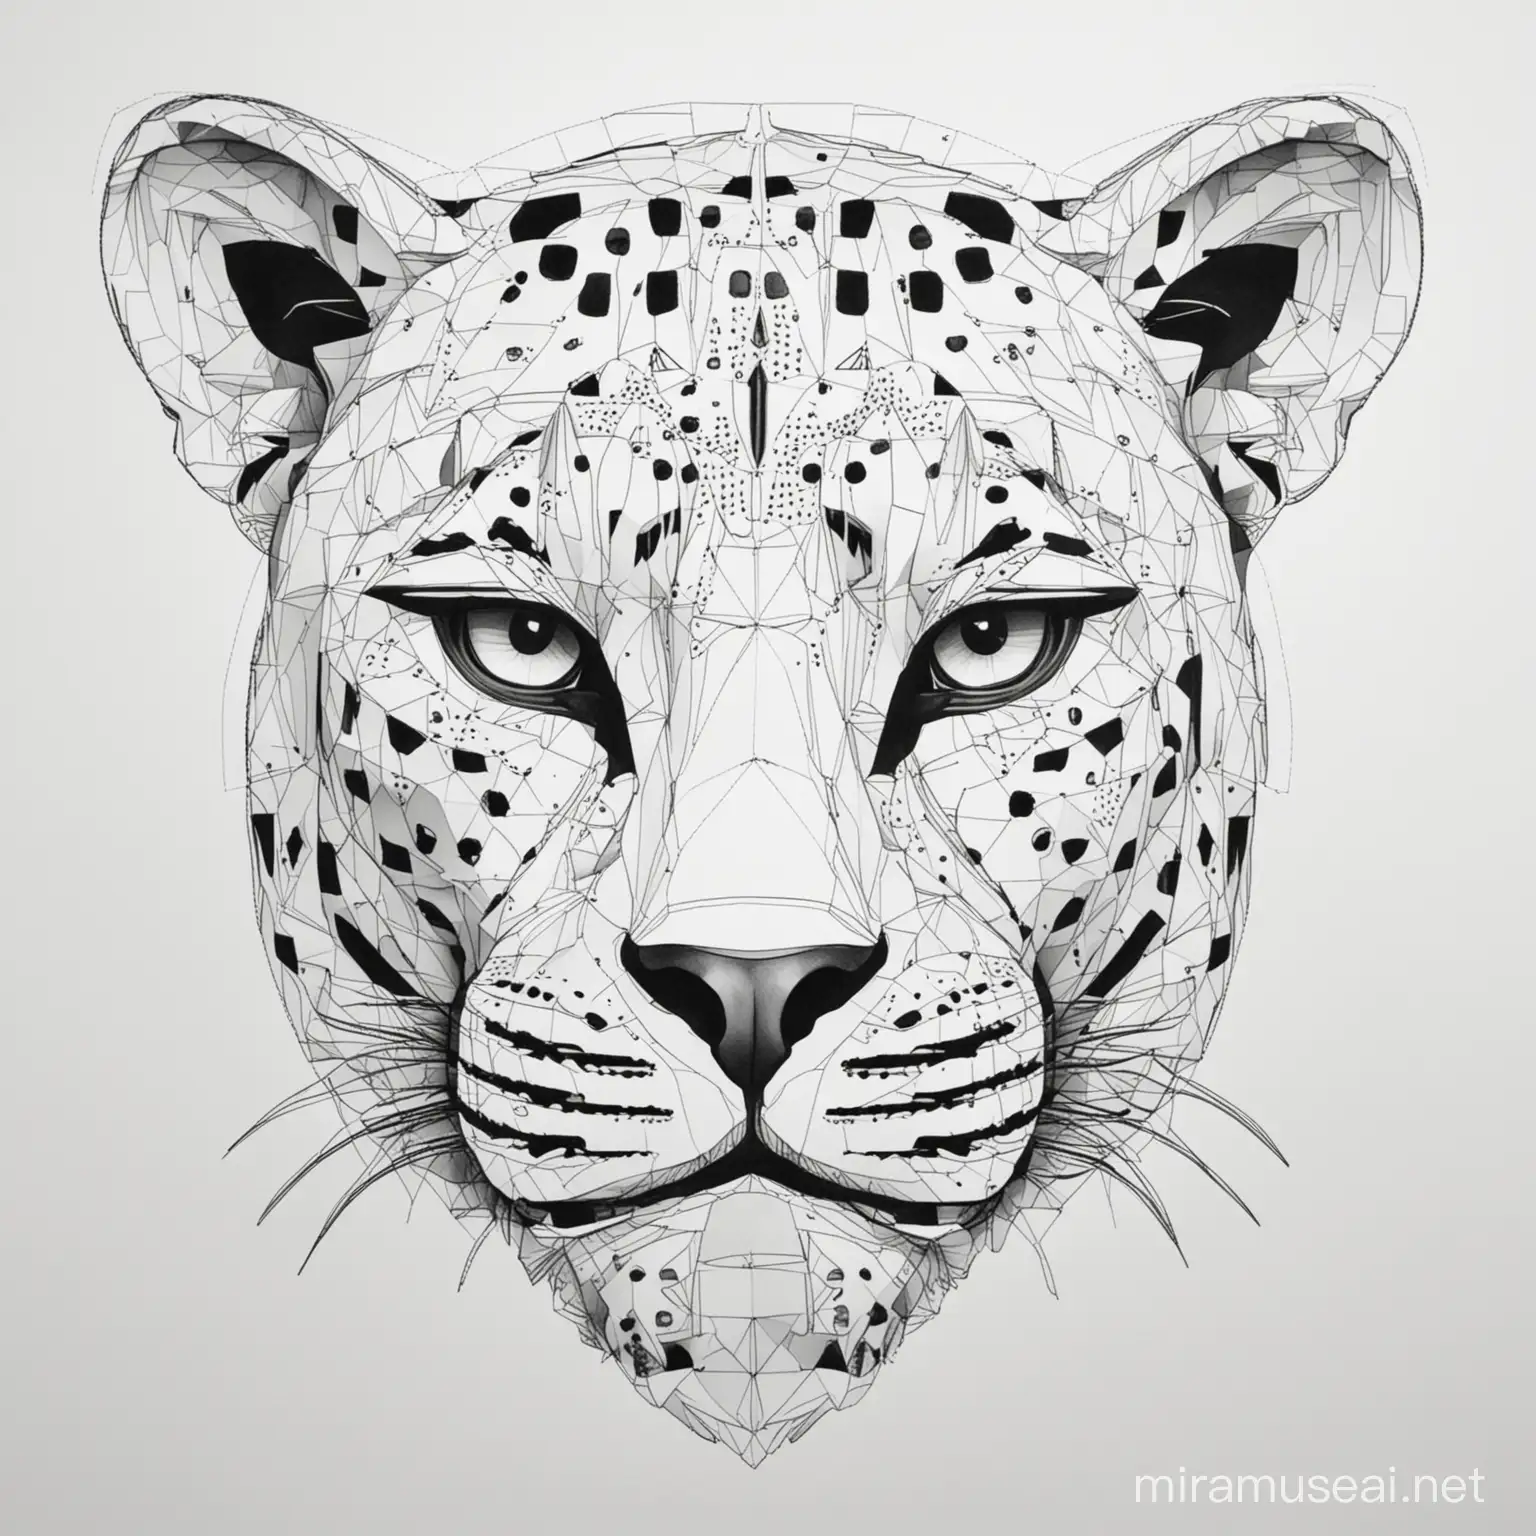 Create a colouring page of A jaguar
,use geometric figures,black and white, in the style abstract minimalism, white background geometric,simple colouring page, no shading